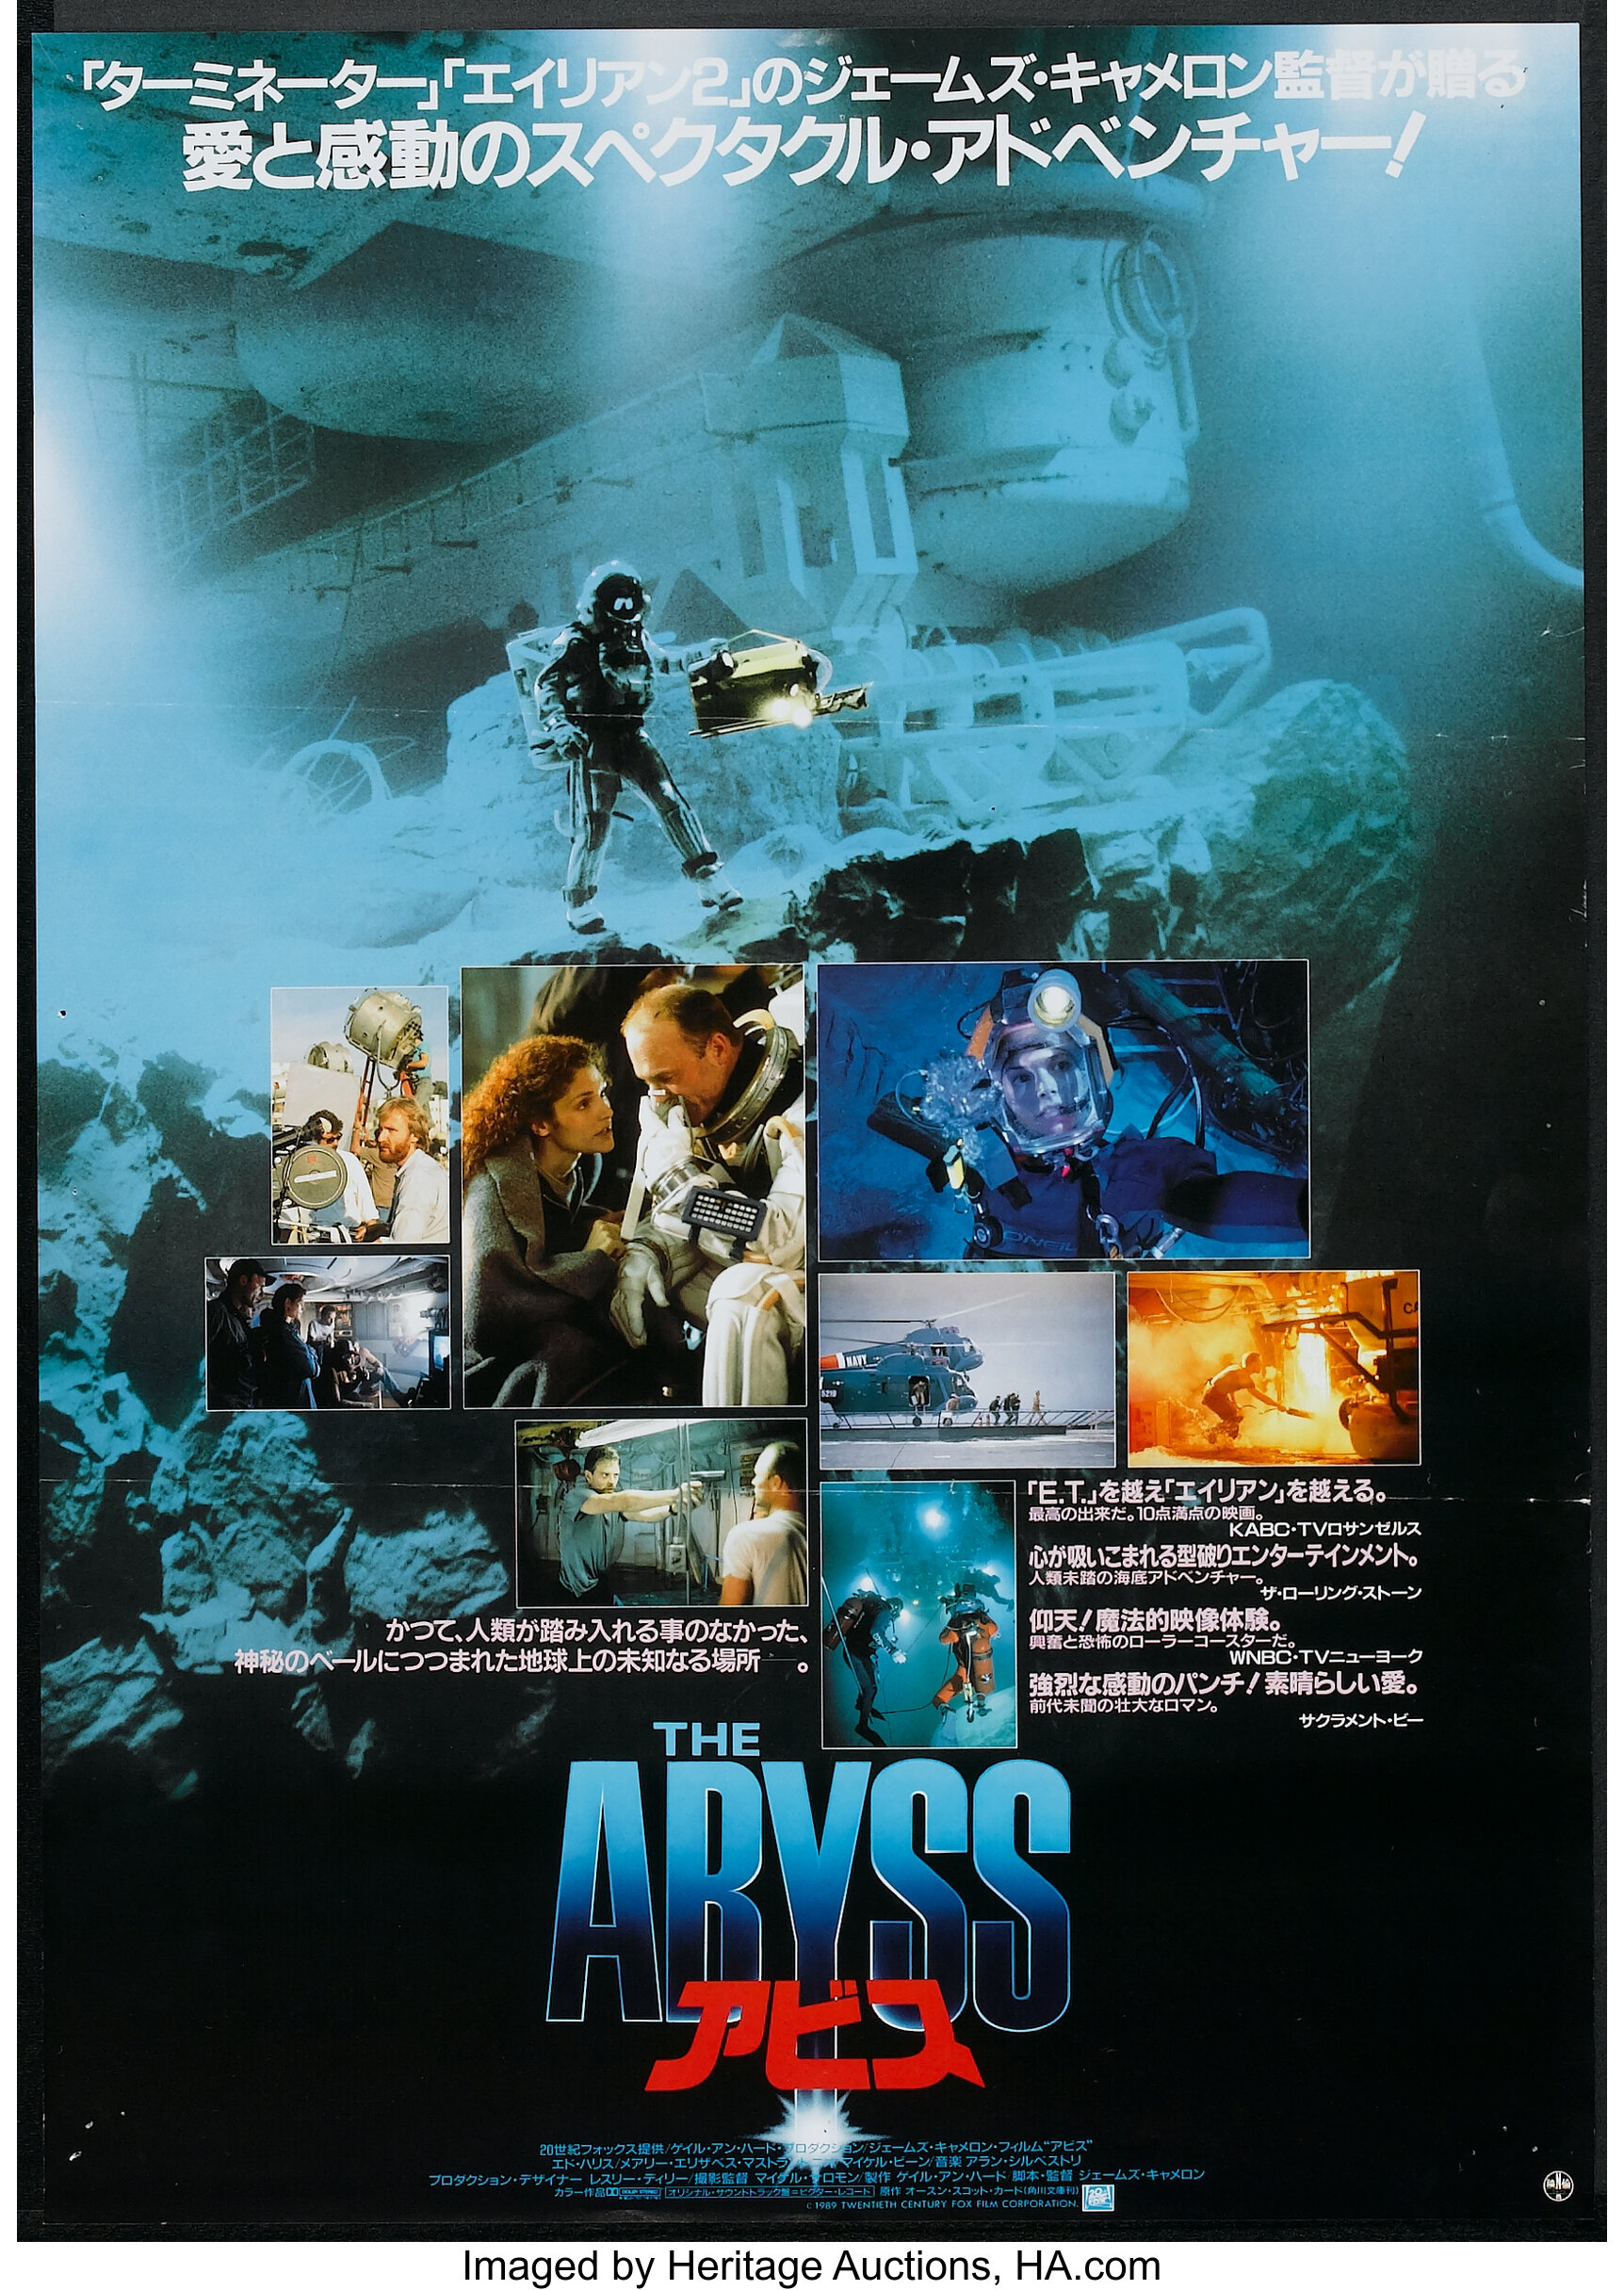 The Abyss 20th Century Fox 1989 Japanese B2 20 25 X 28 5 Lot 9 Heritage Auctions